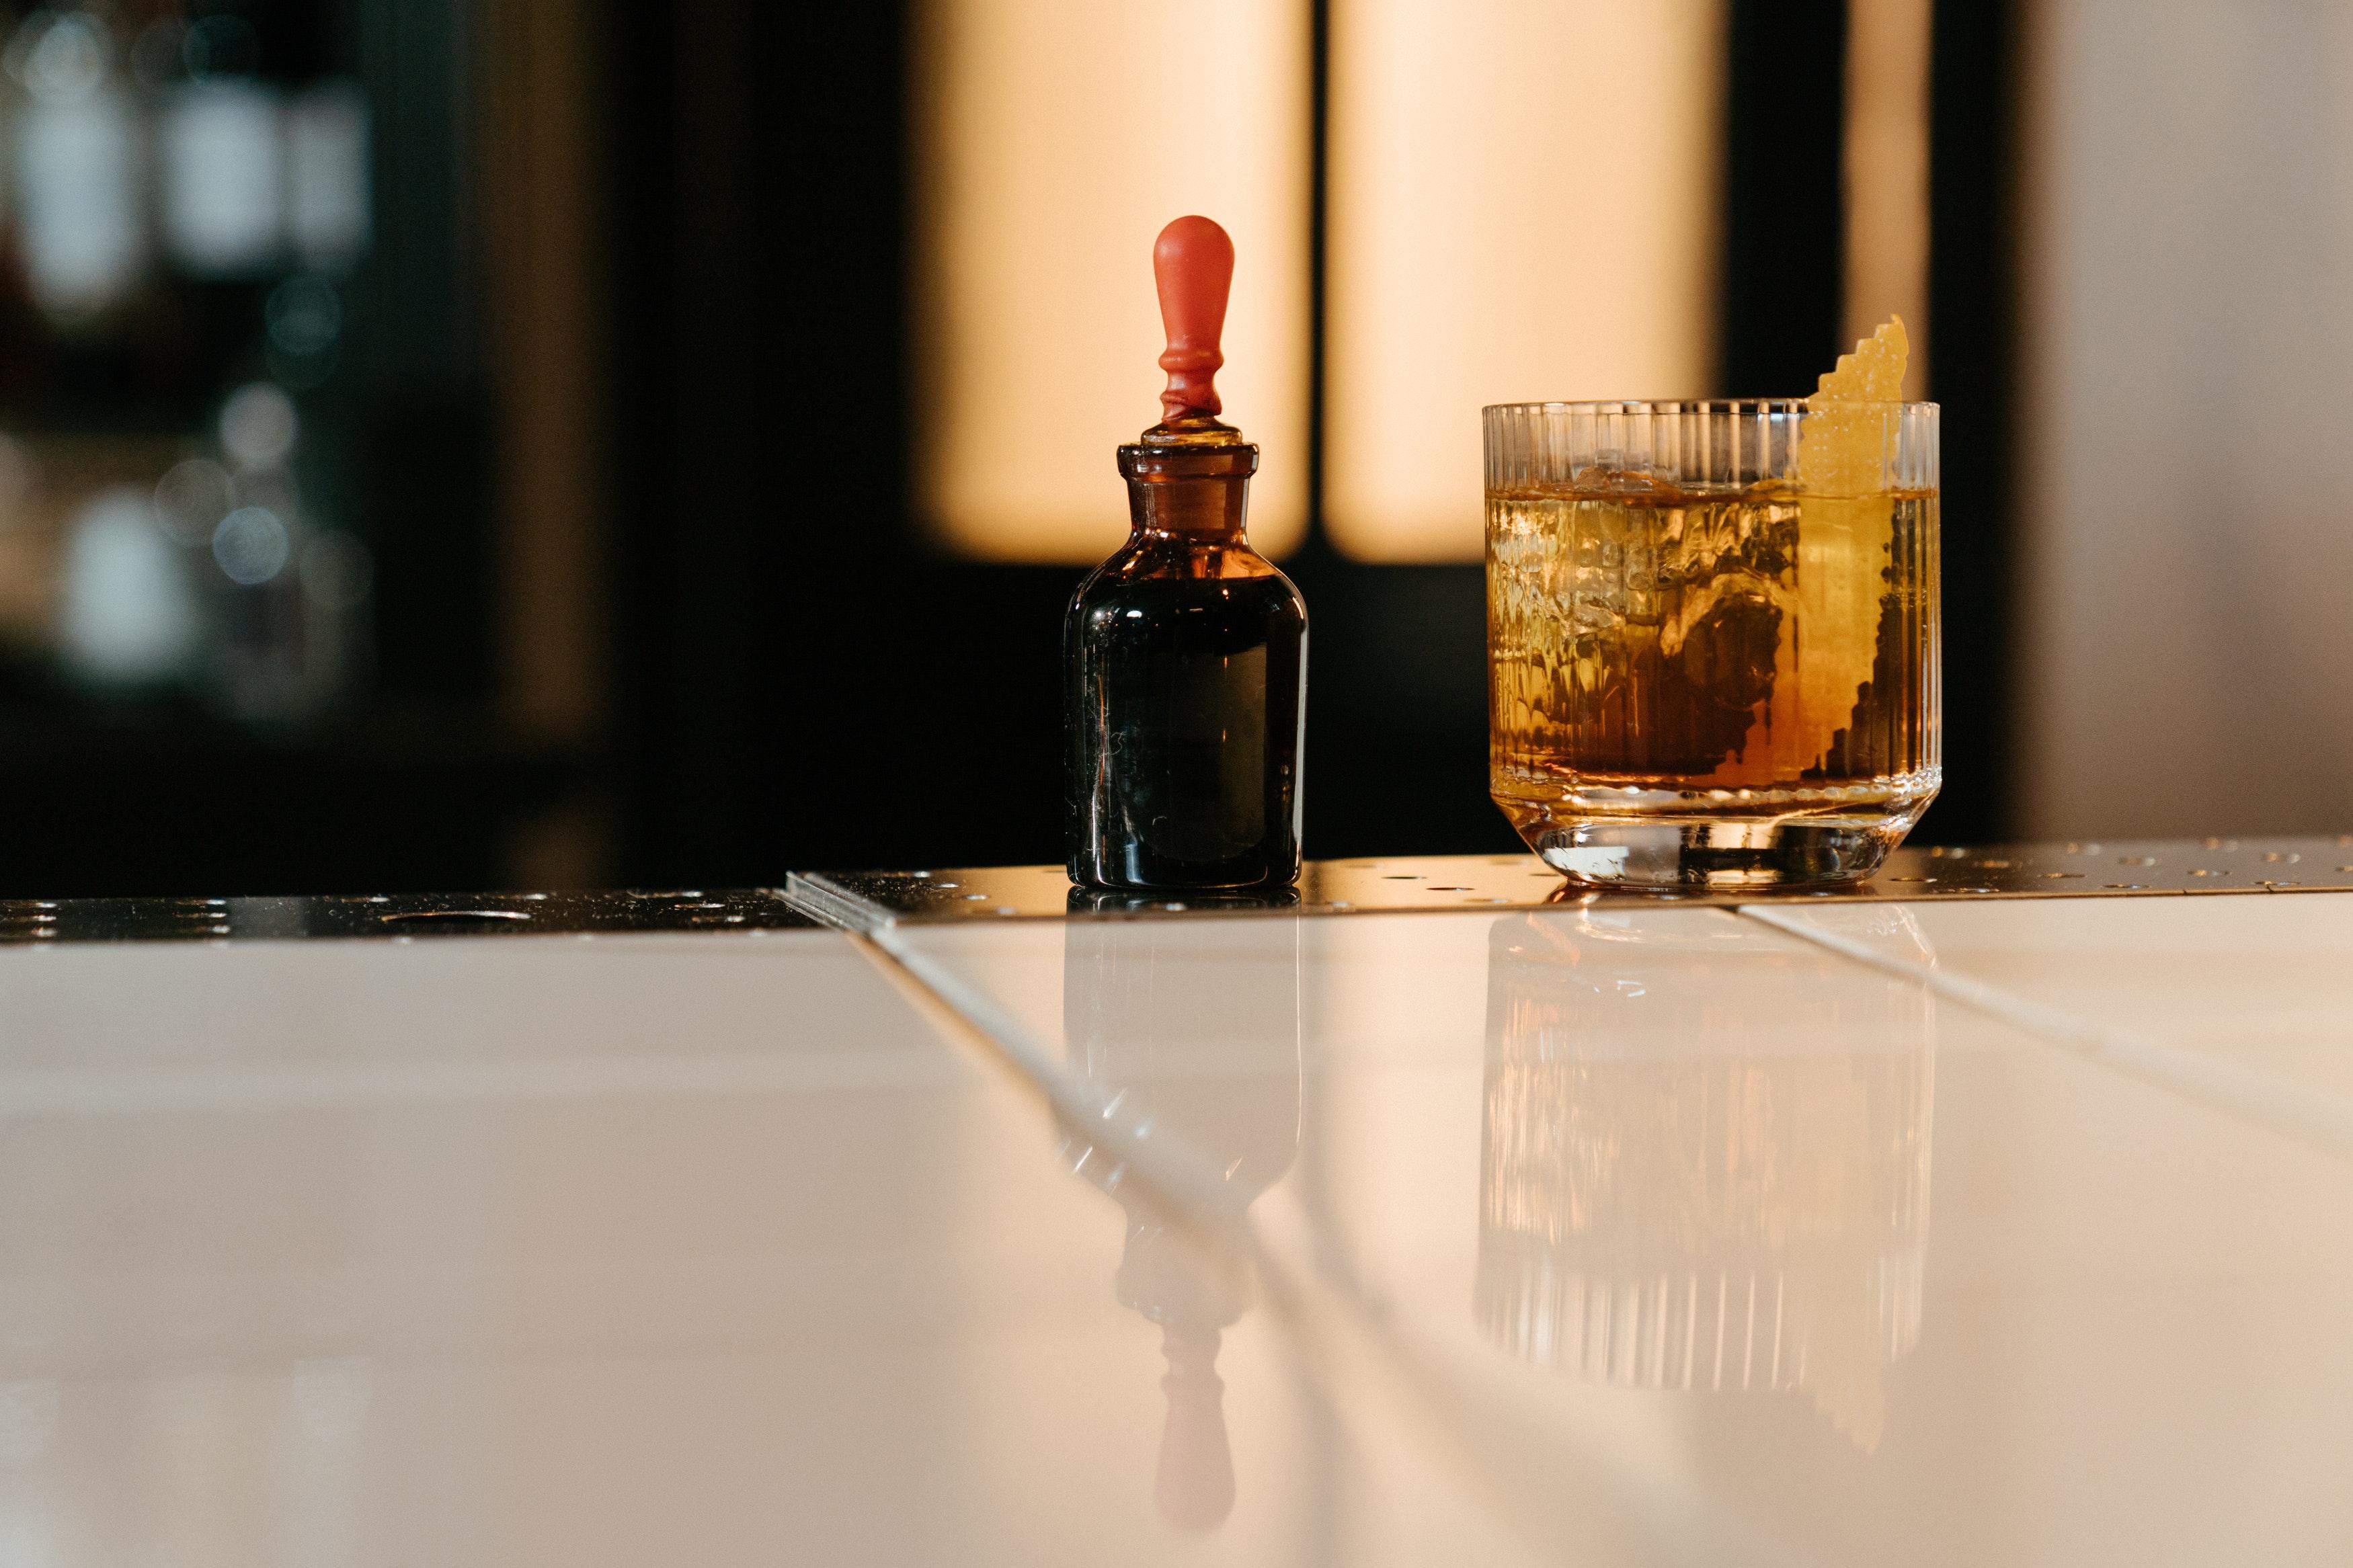 Bitters bottle next to old fashioned cocktail